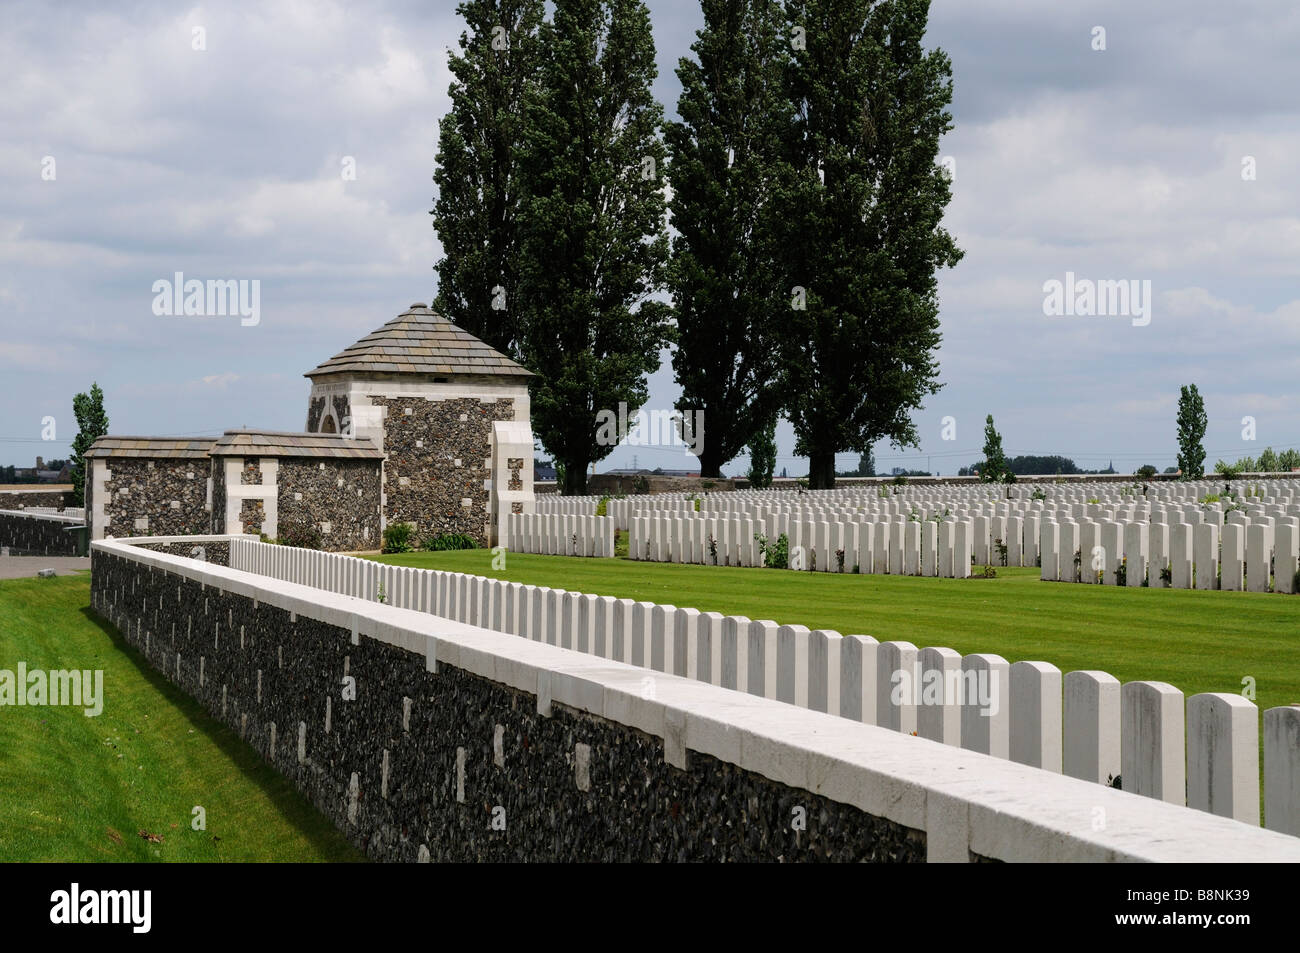 Rows of headstones lined up against the outside wall of Tyne Cot Cemetery Stock Photo